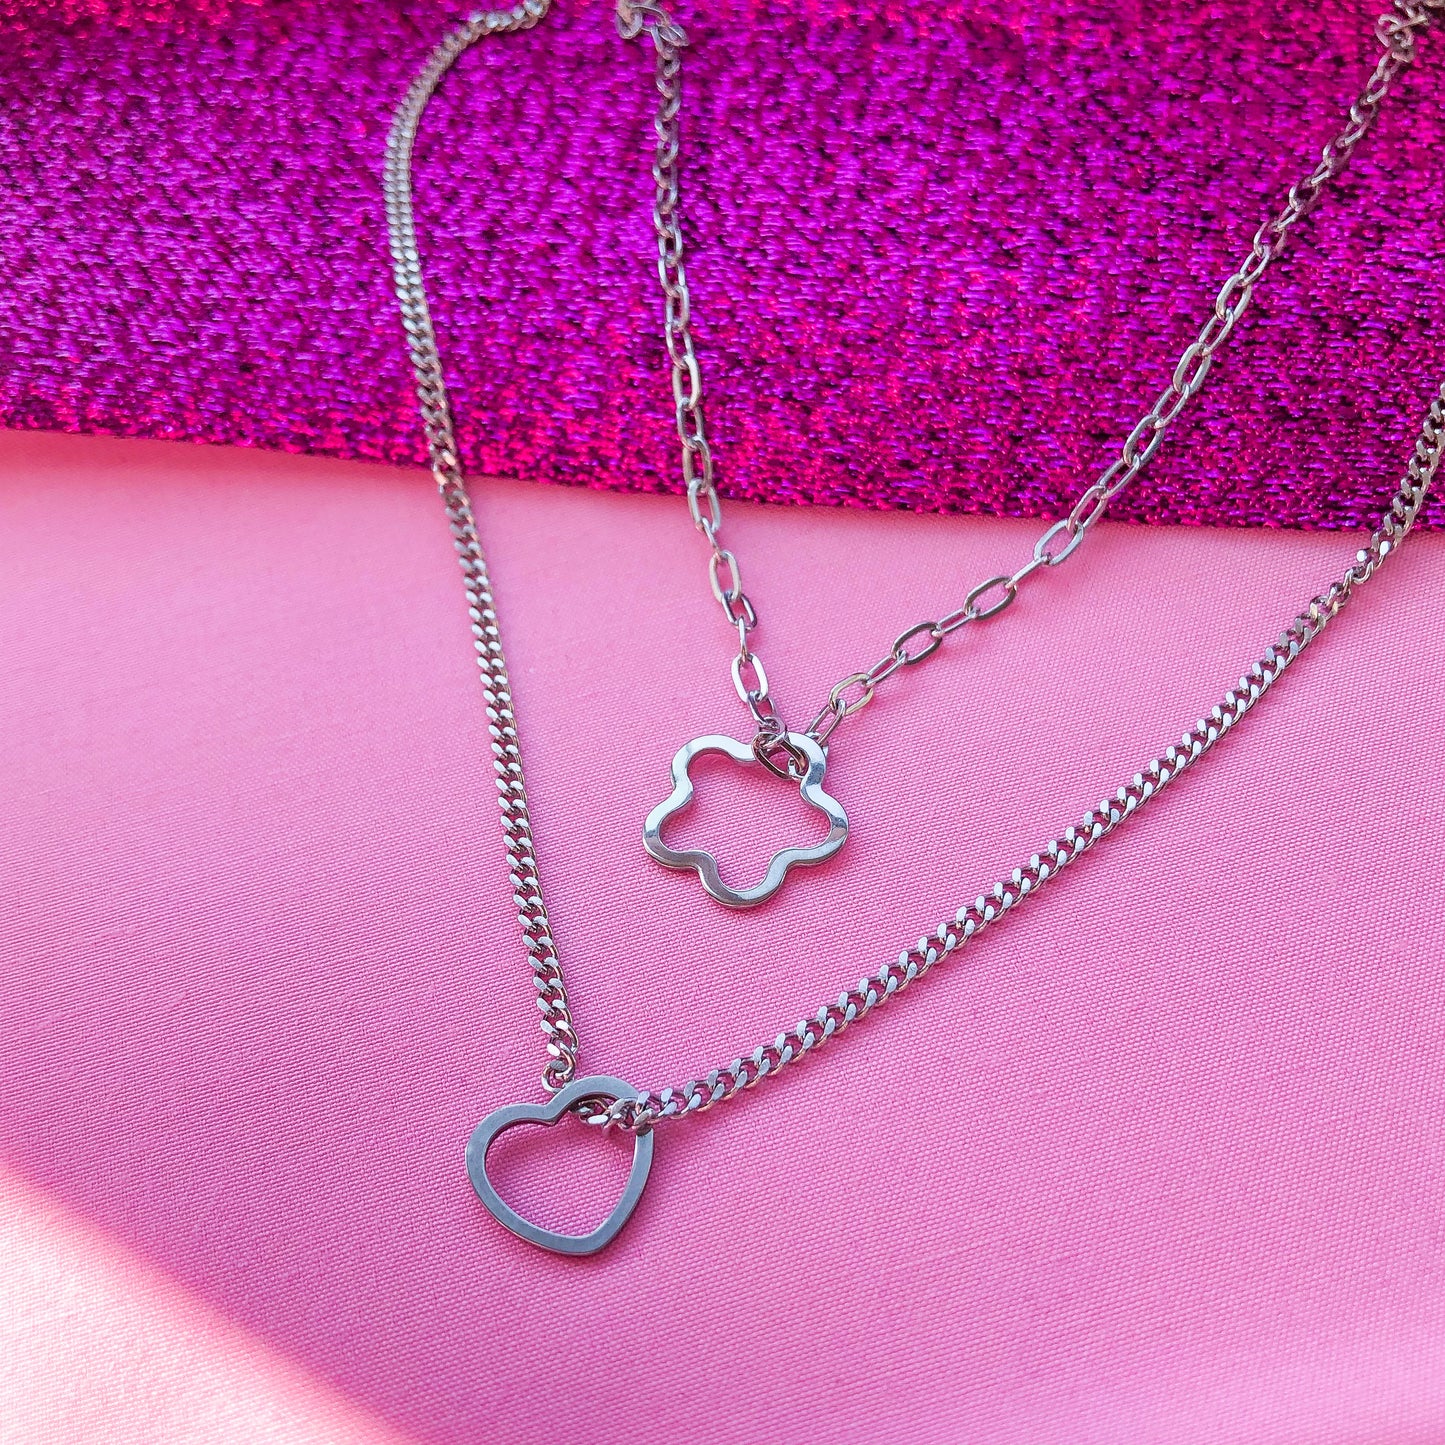 Layered stainless steel necklace with love heart and flower charm